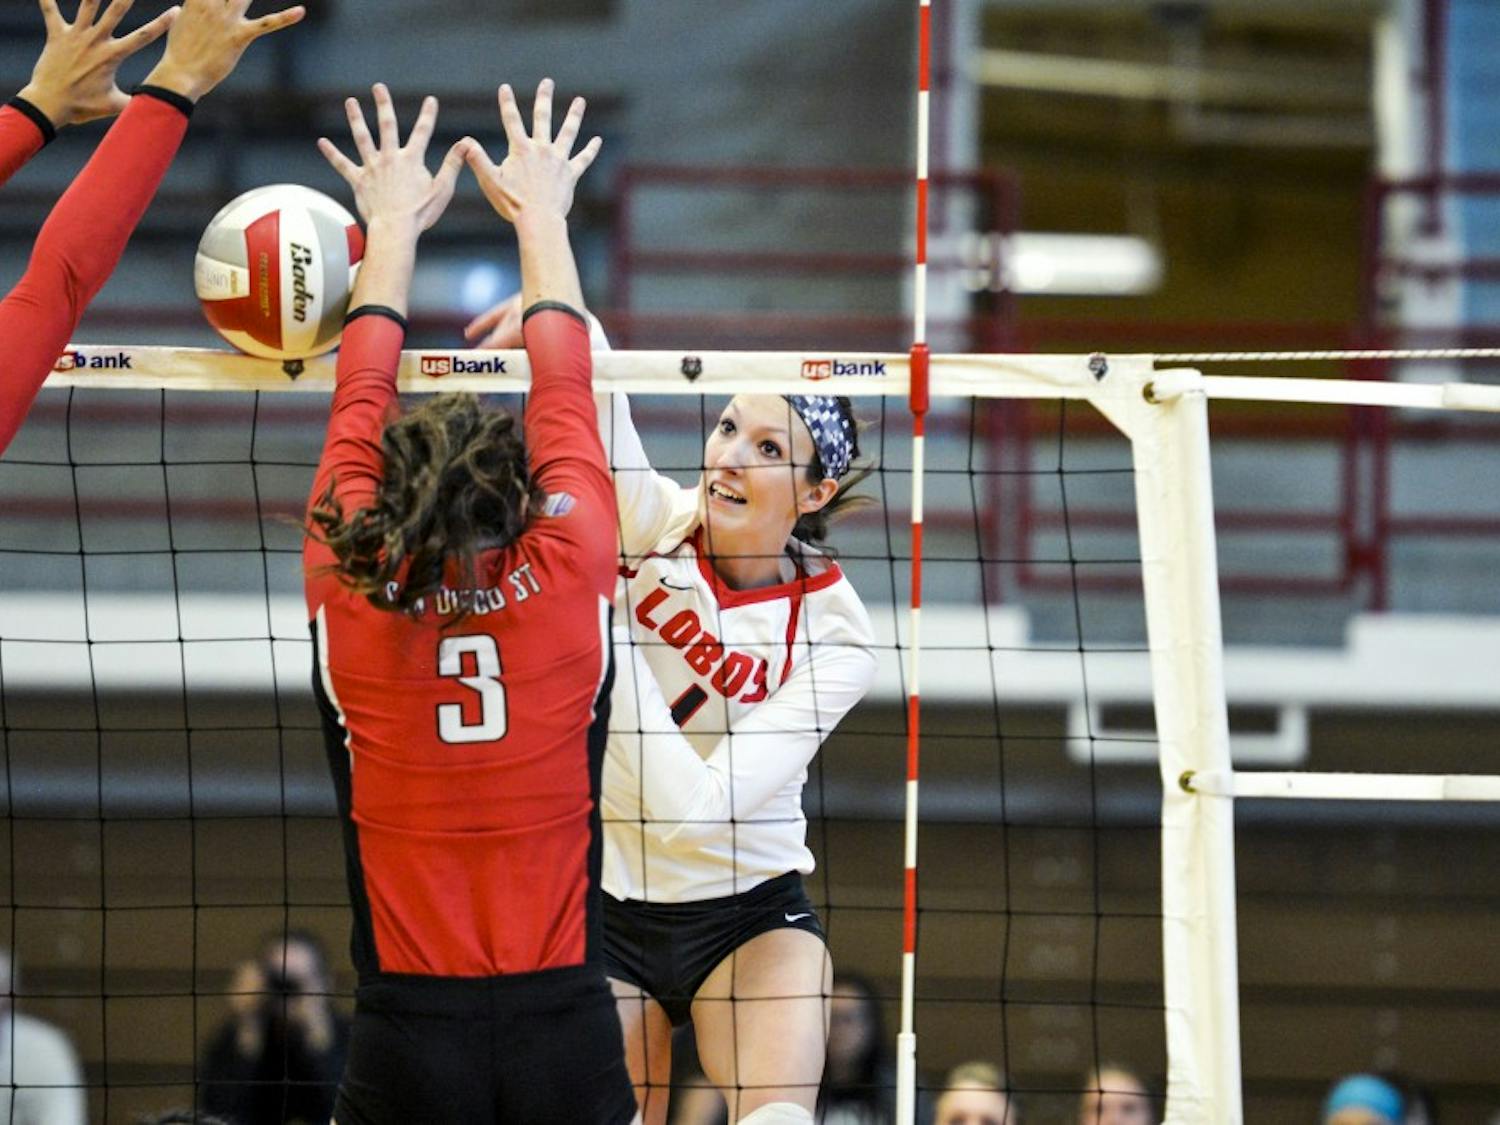 Senior outside hitter Devanne Sours sends the ball past two San Diego State University players Saturday, Nov. 19, 2016 at Johnson Center Gym. The Lobos beat the Aztecs in their last season game 3-0.&nbsp;